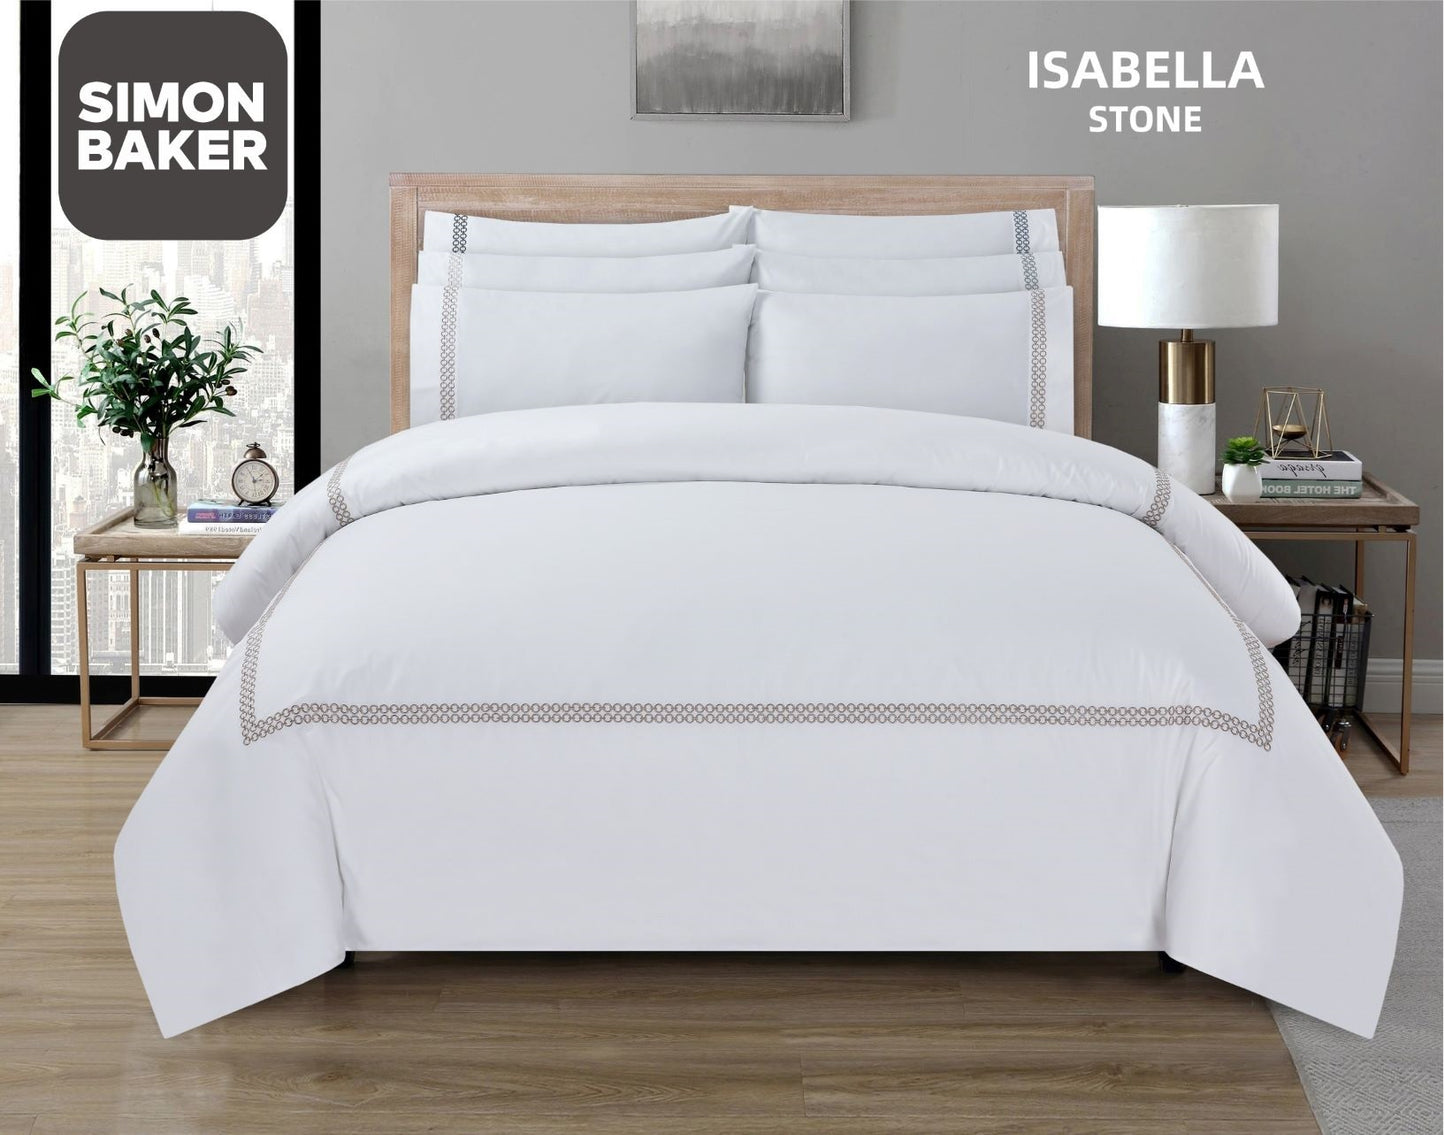 Simon Baker | T200 Cotton Percale Embroidered Duvet Cover Set - Isabella Stone (Various Sizes)